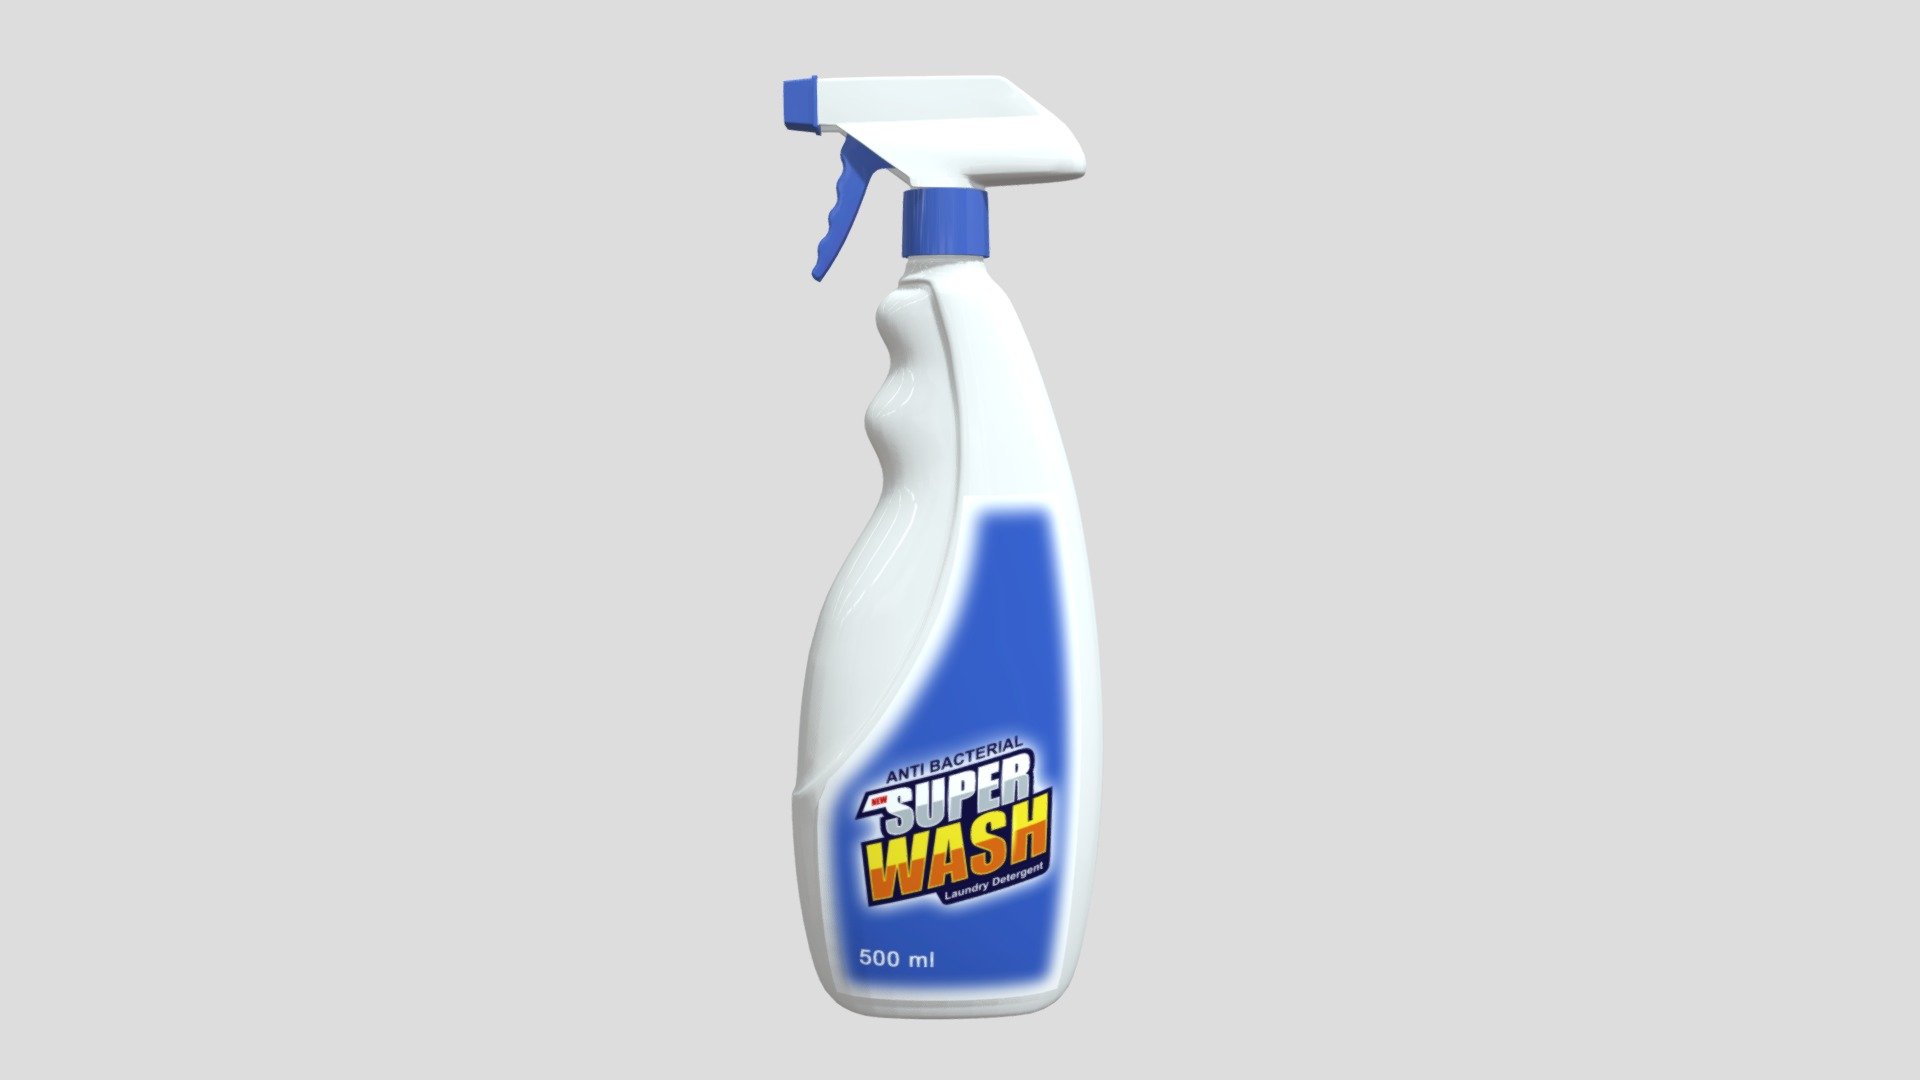 Trigger Spray 3D model is a high quality, photo real model that will enhance detail and realism to any of your game projects or commercials. The model has a fully textured, detailed design that allows for close-up renders 3d model